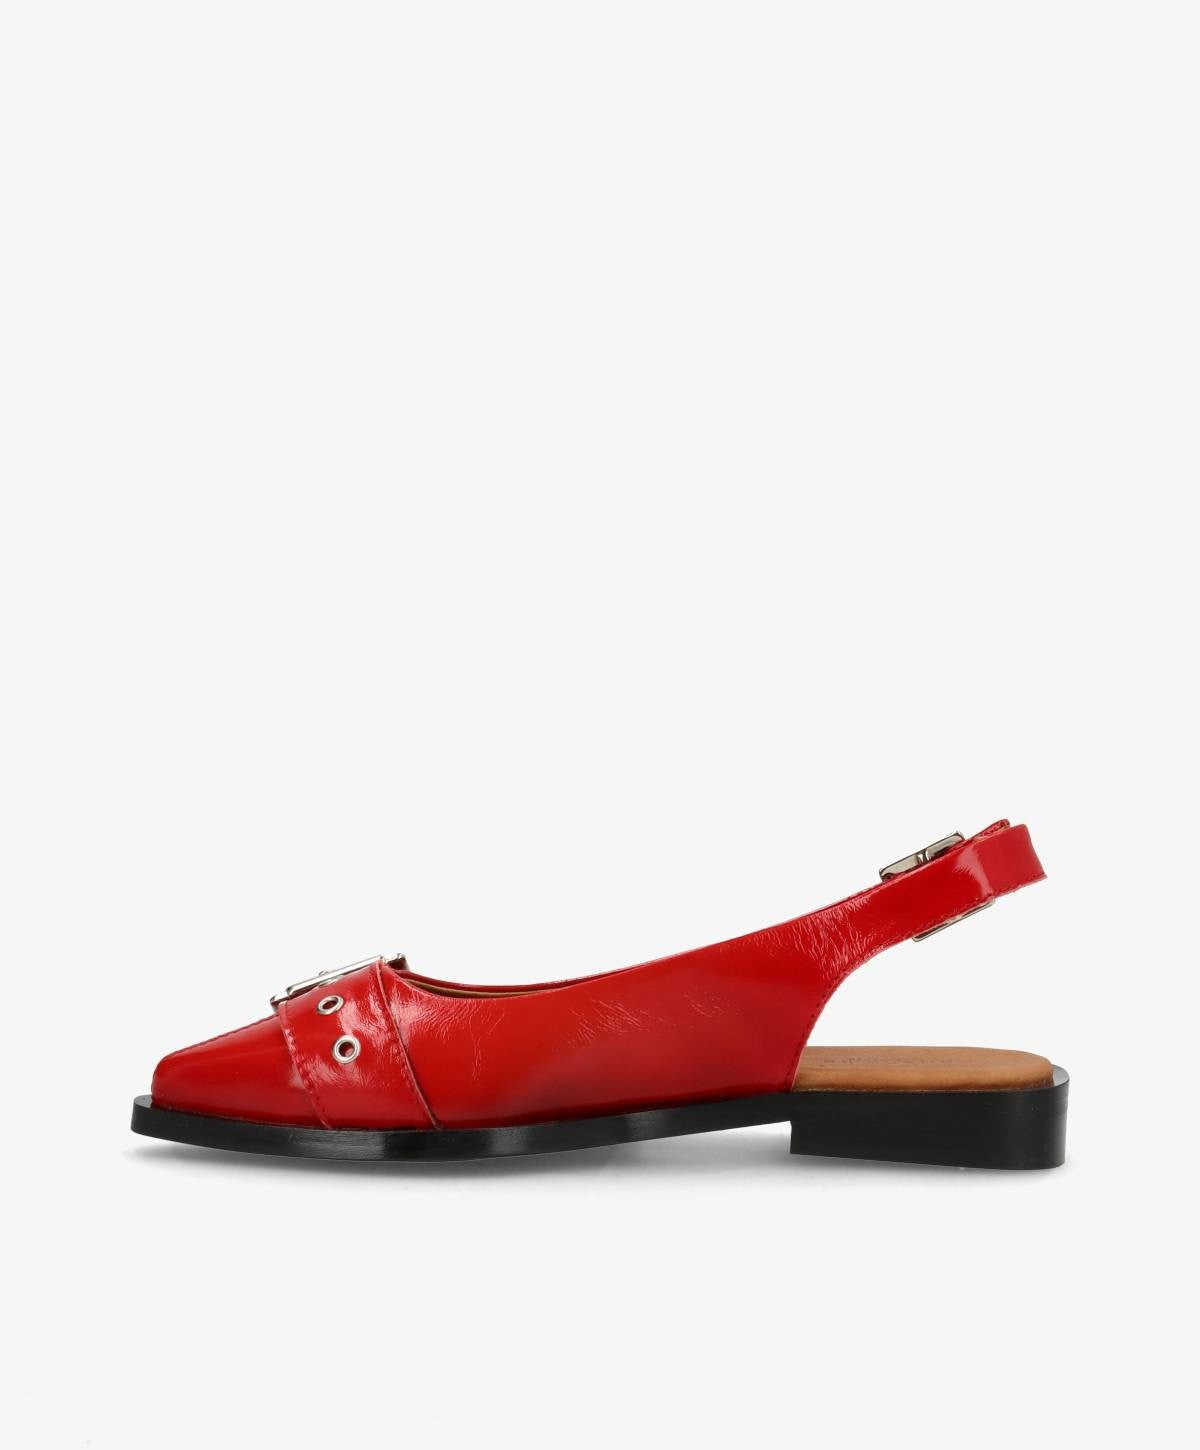 Phenumb Want Leather Patent Red